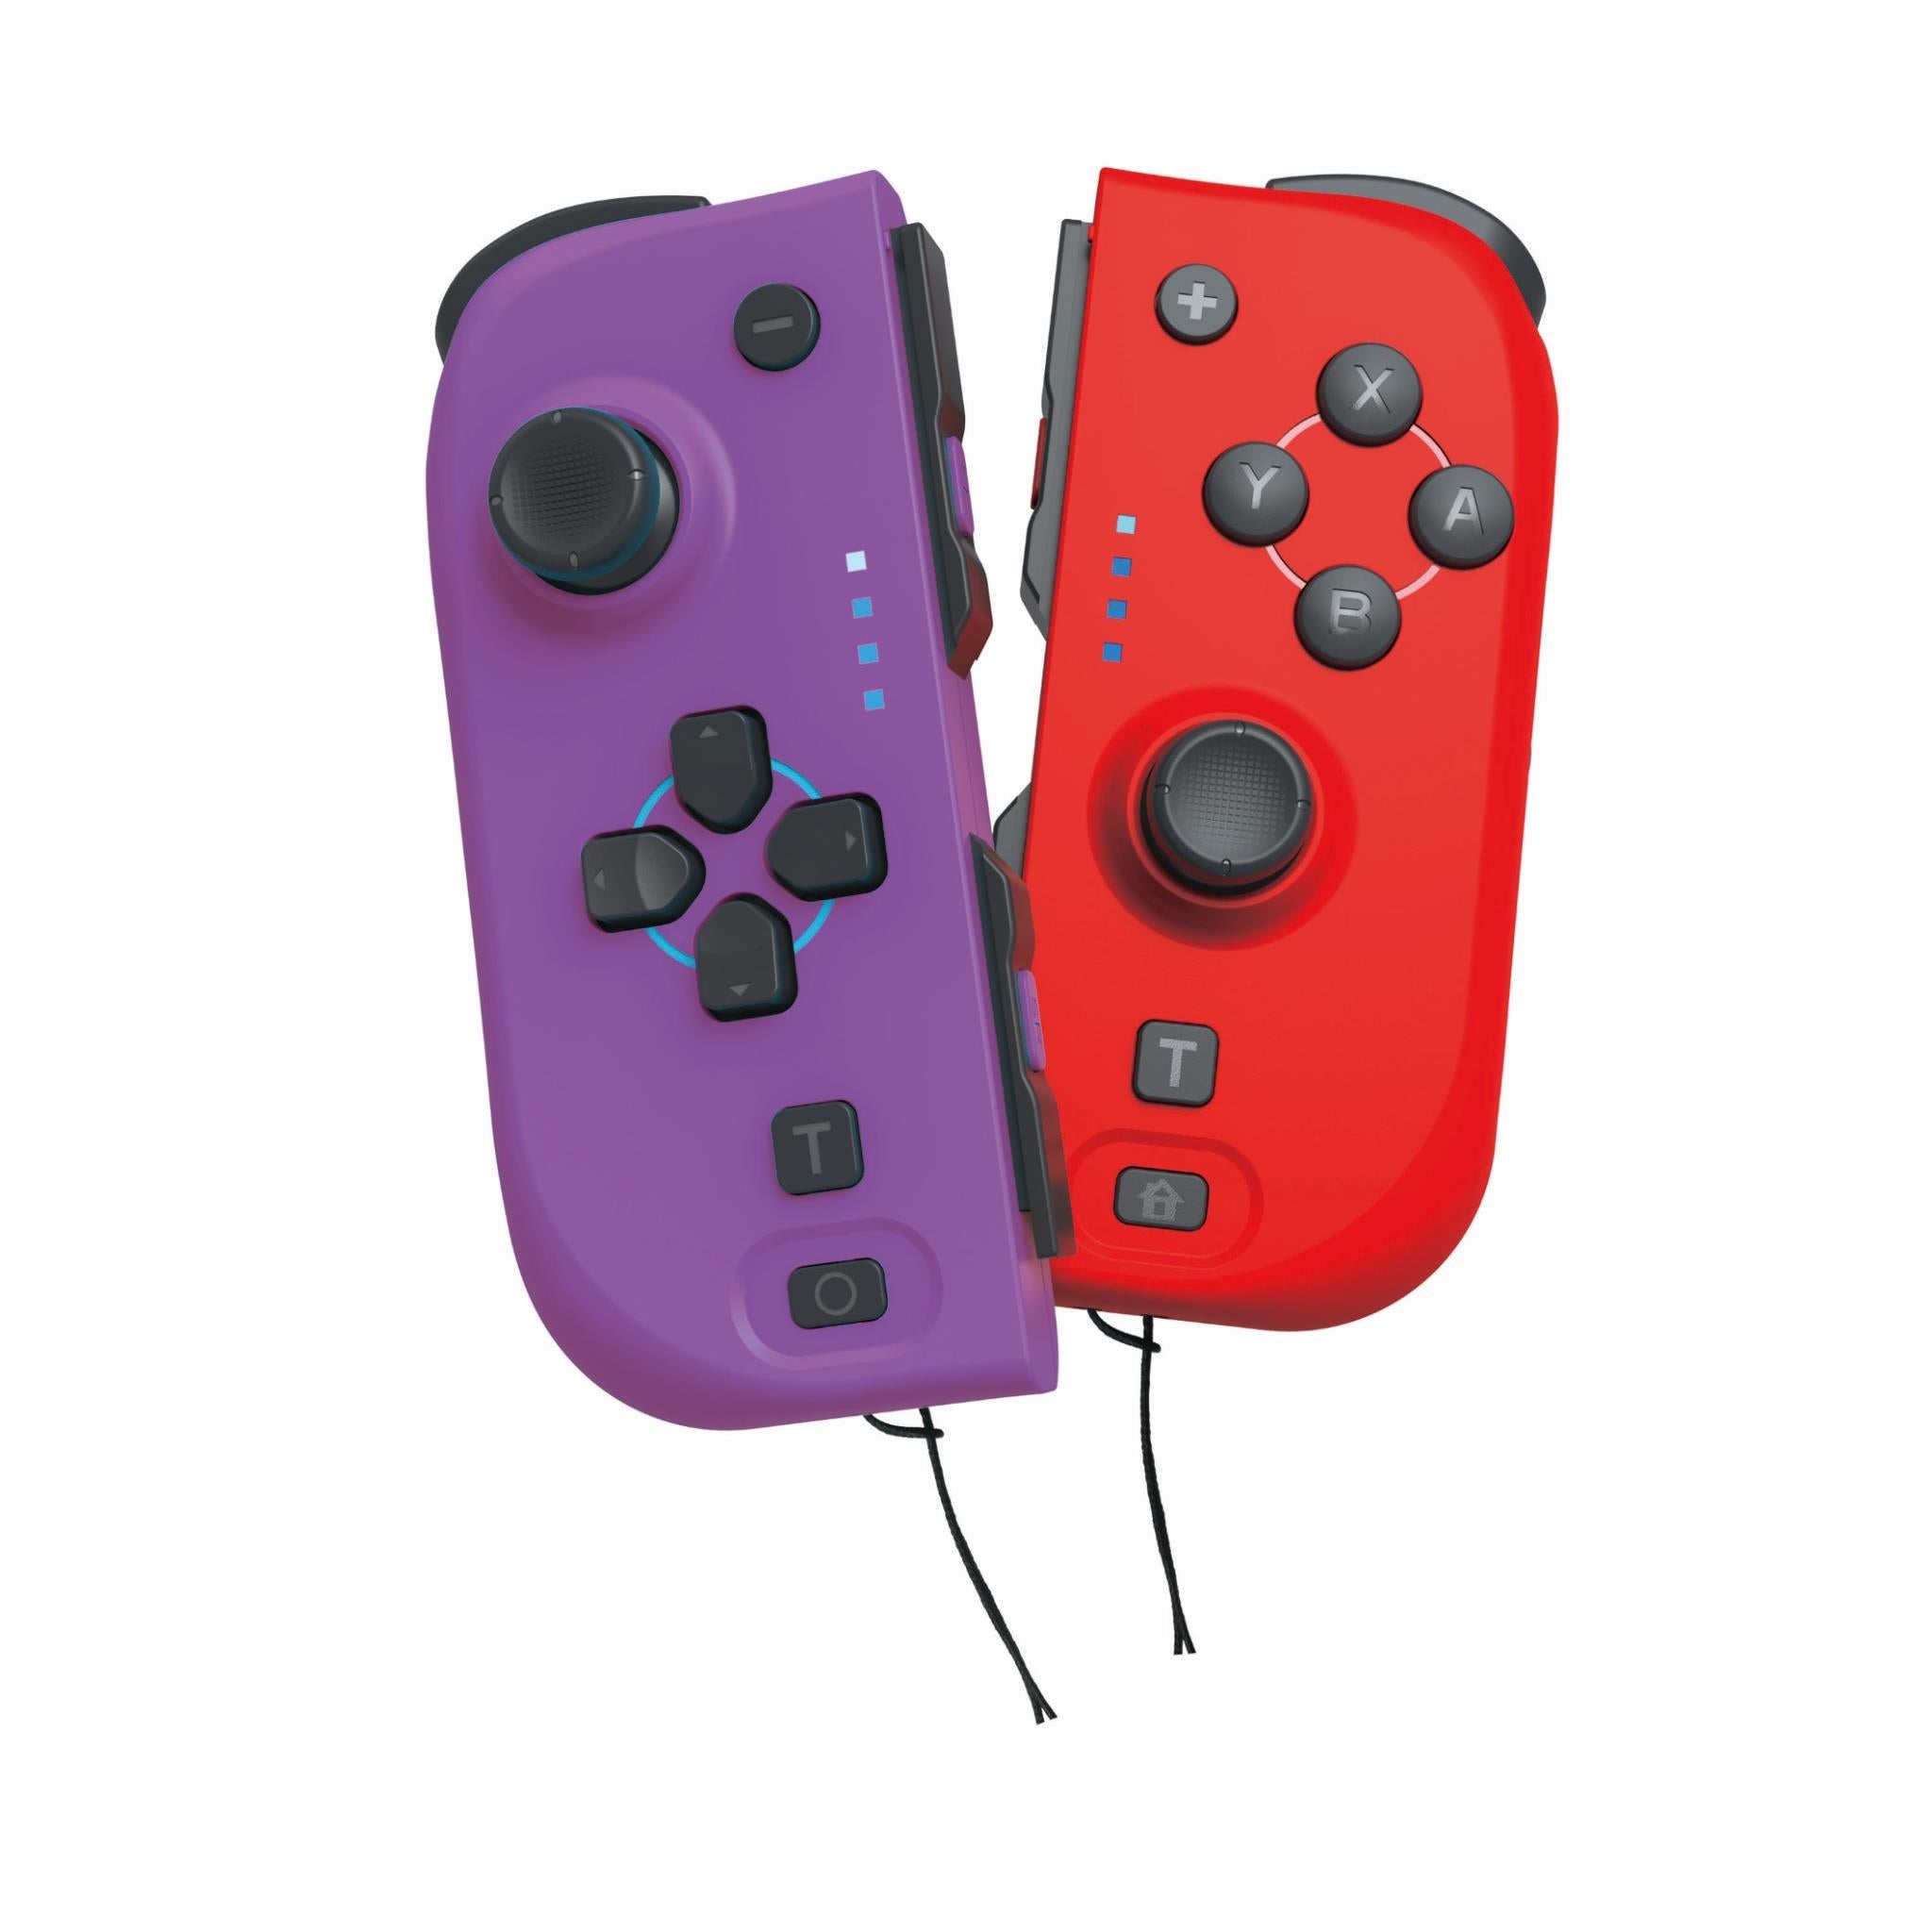 3rd earth switch joypad controllers for nintendo switch (red & purple)